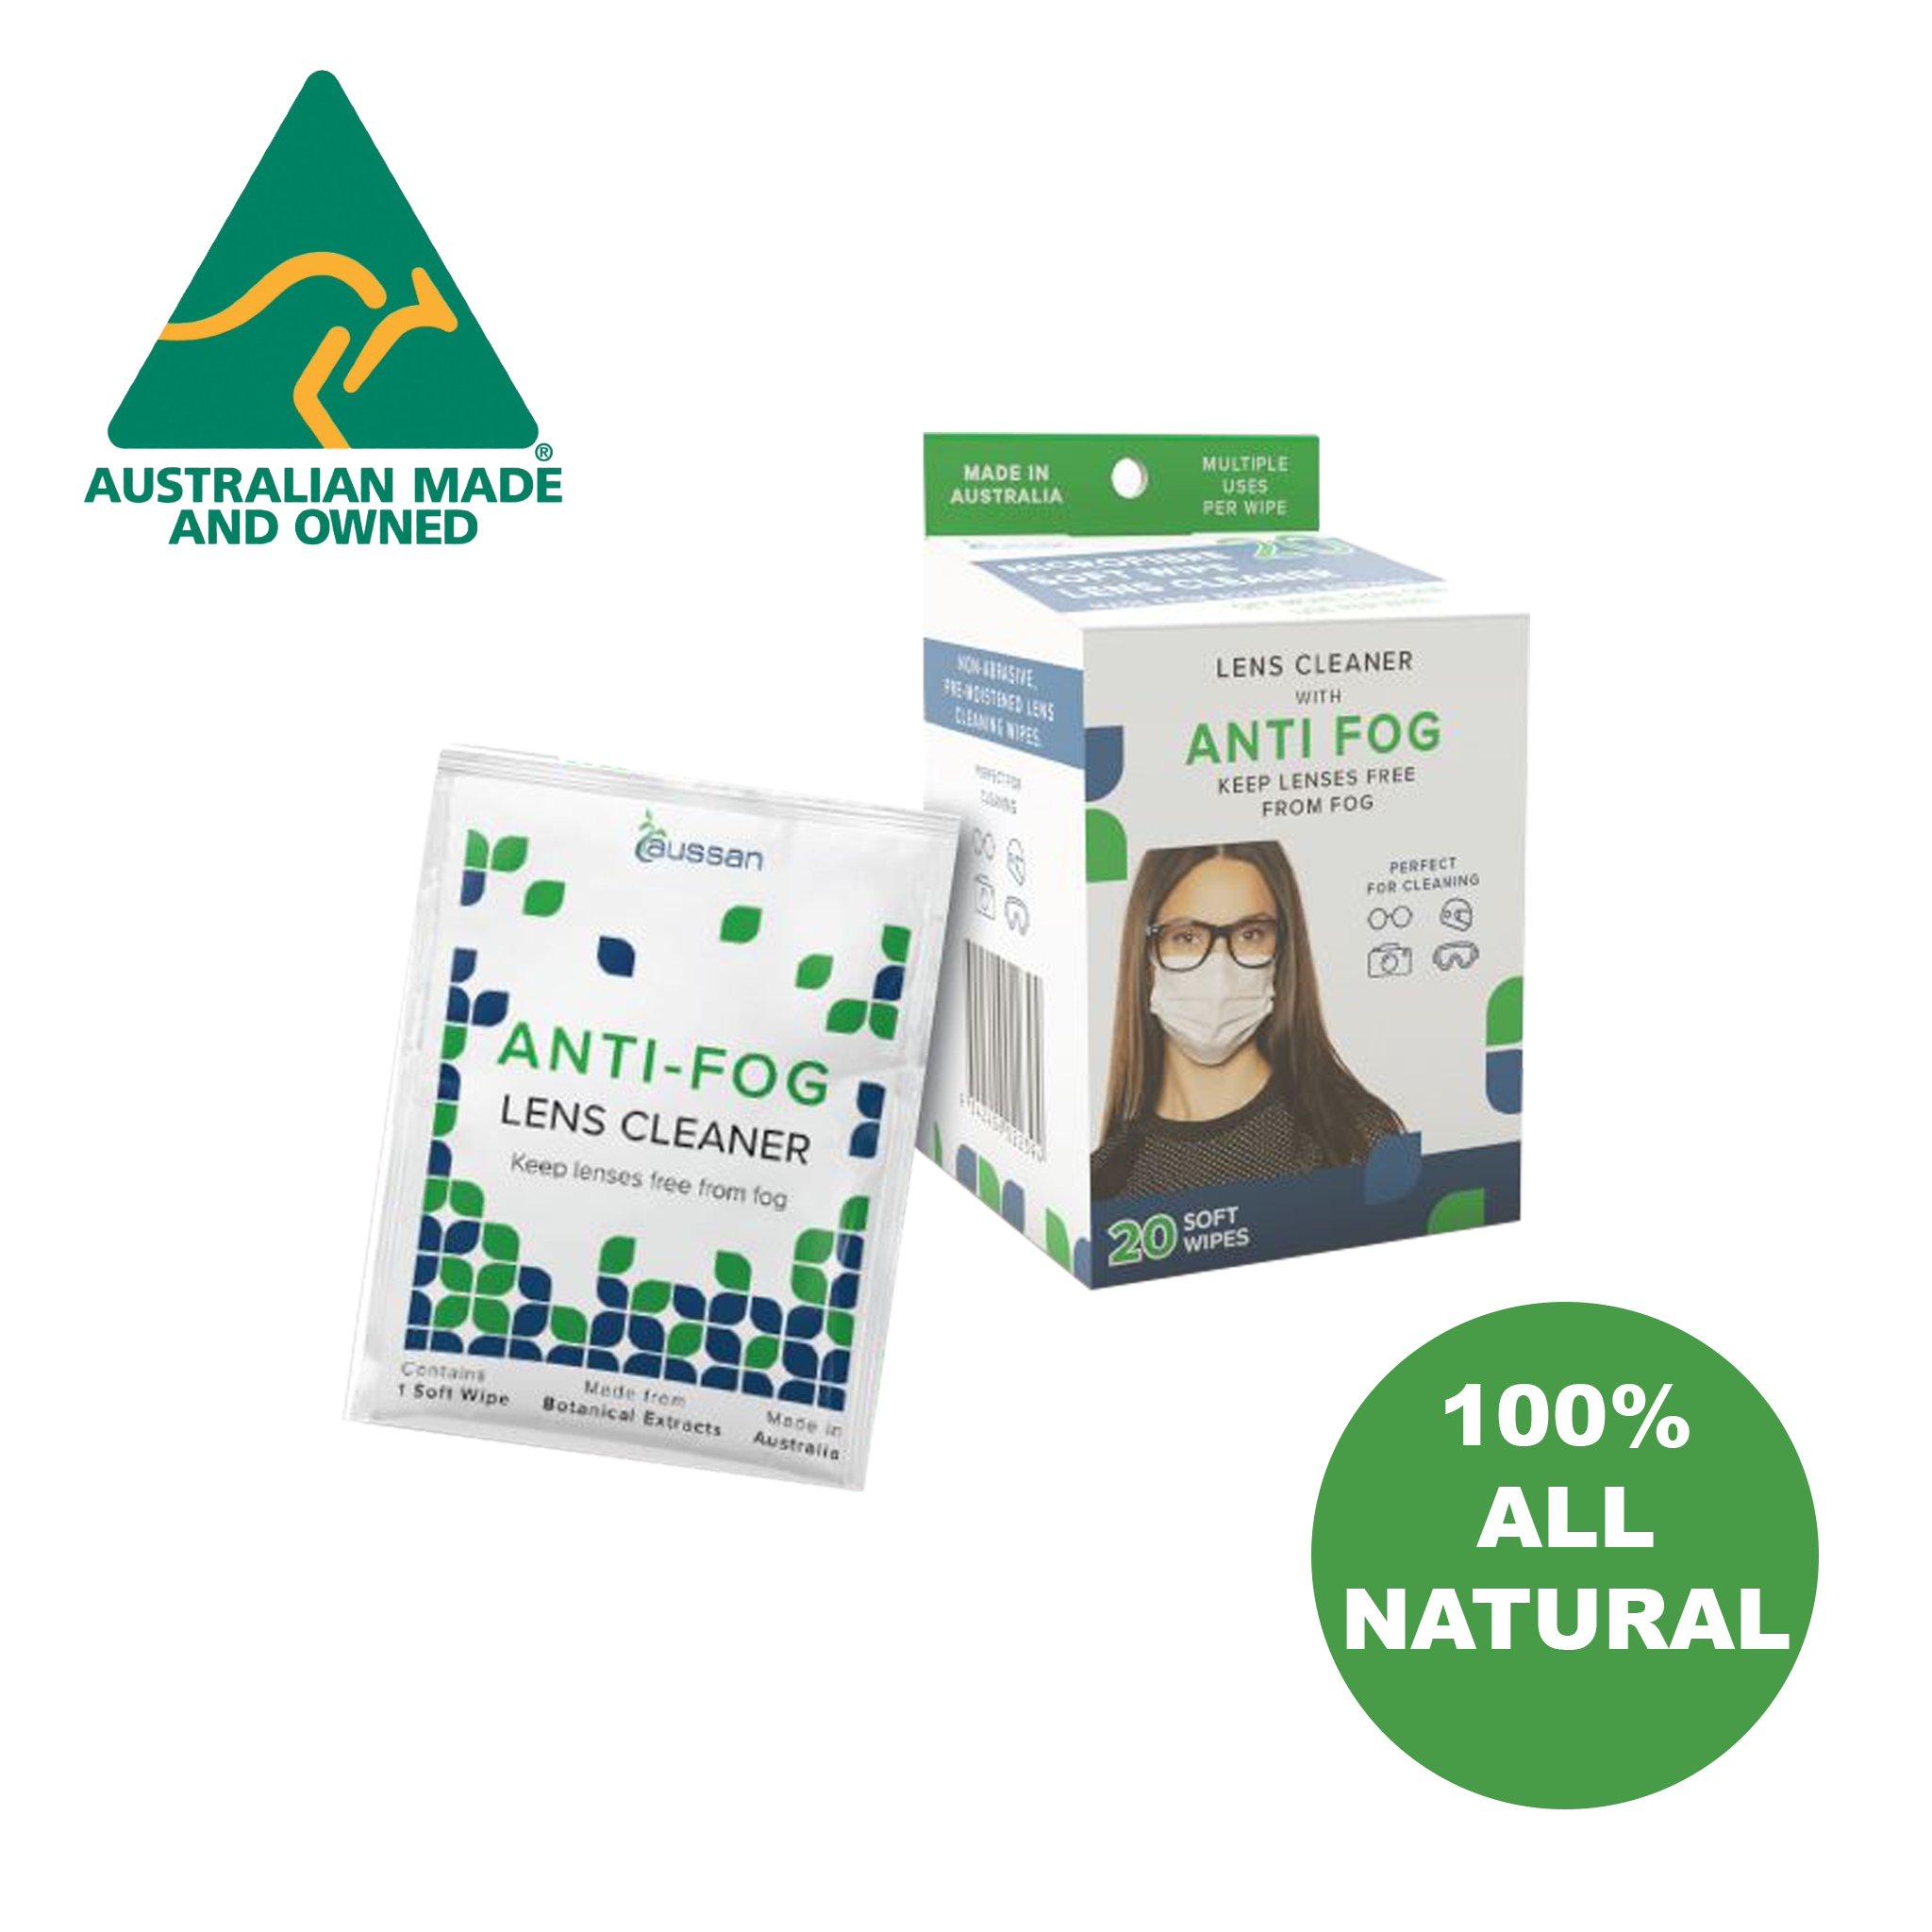 AusMed Health - Aussan Re-Usable | Anti-Fog Wipes (3xboxes/ 60 wipes)